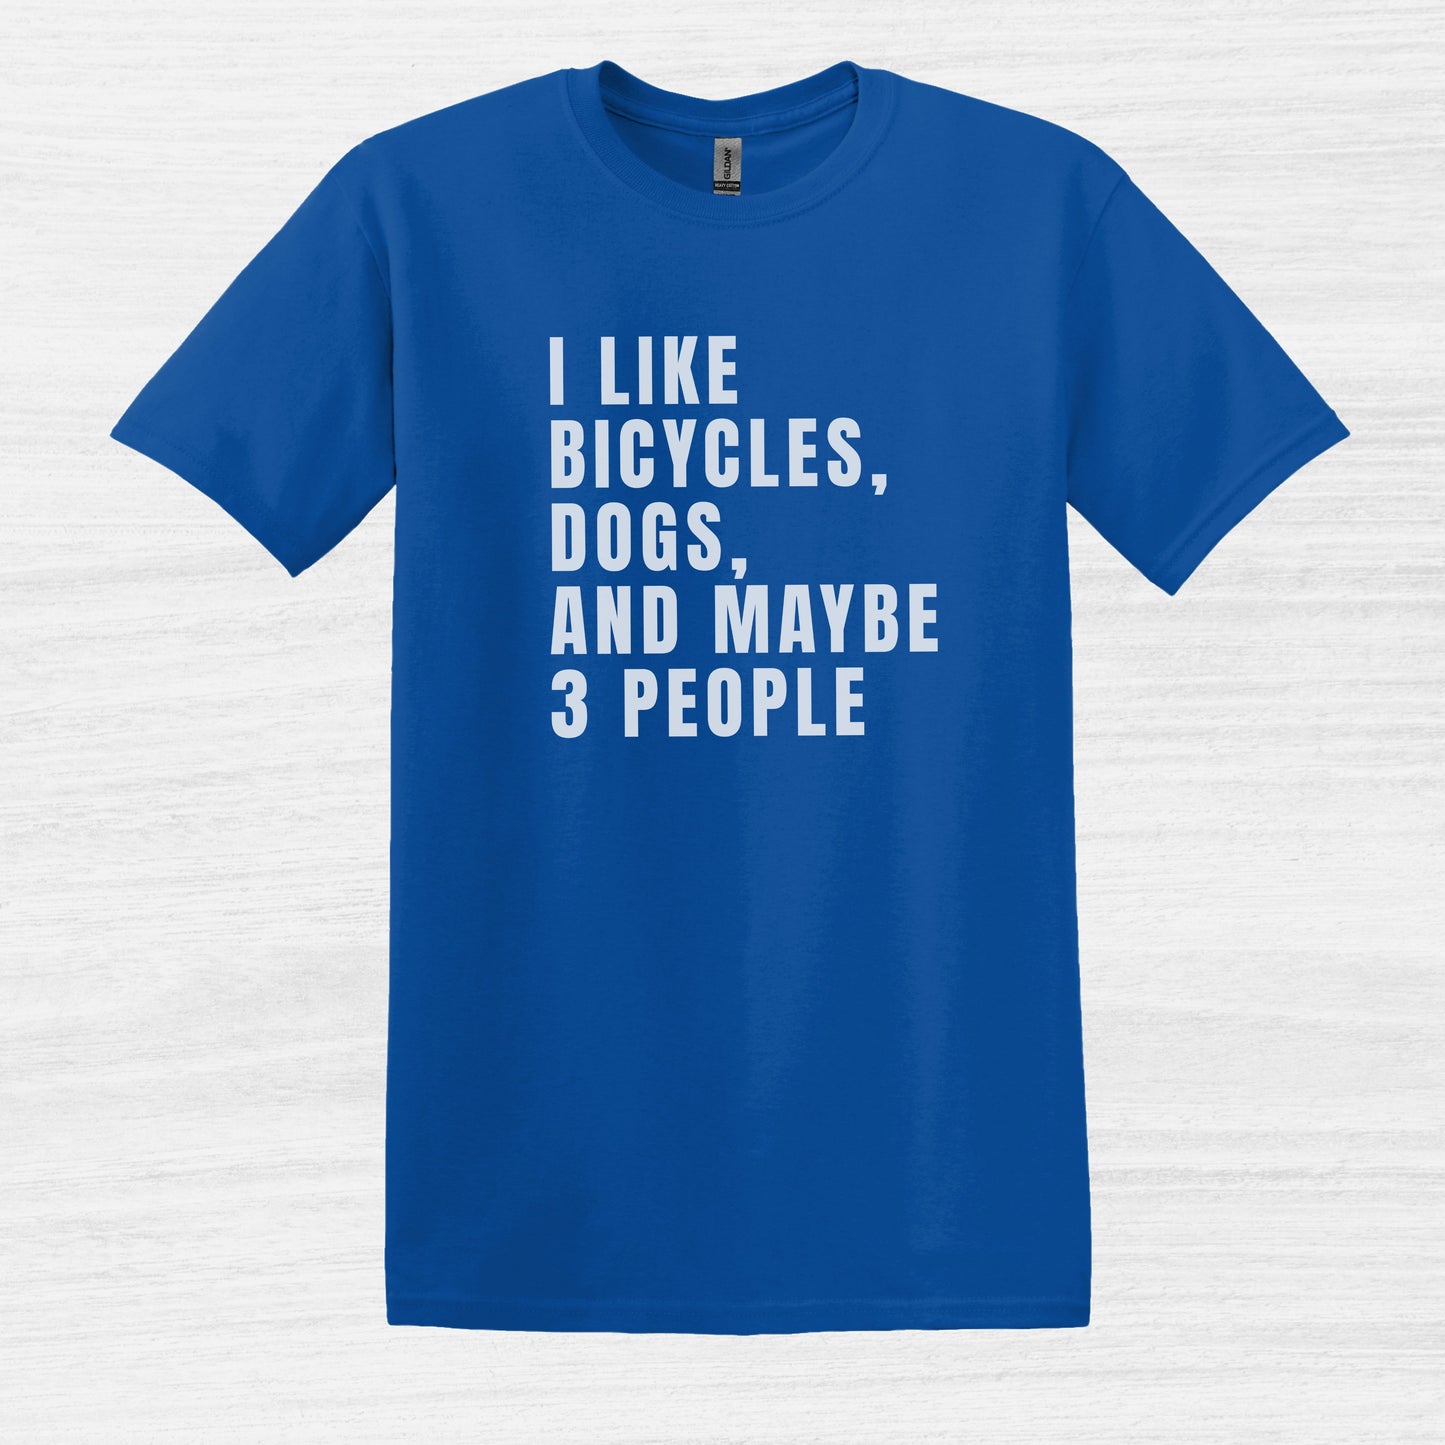 Bike Bliss I Like bicycles dogs and maybe 3 people T-Shirt for men Royal Blue 2